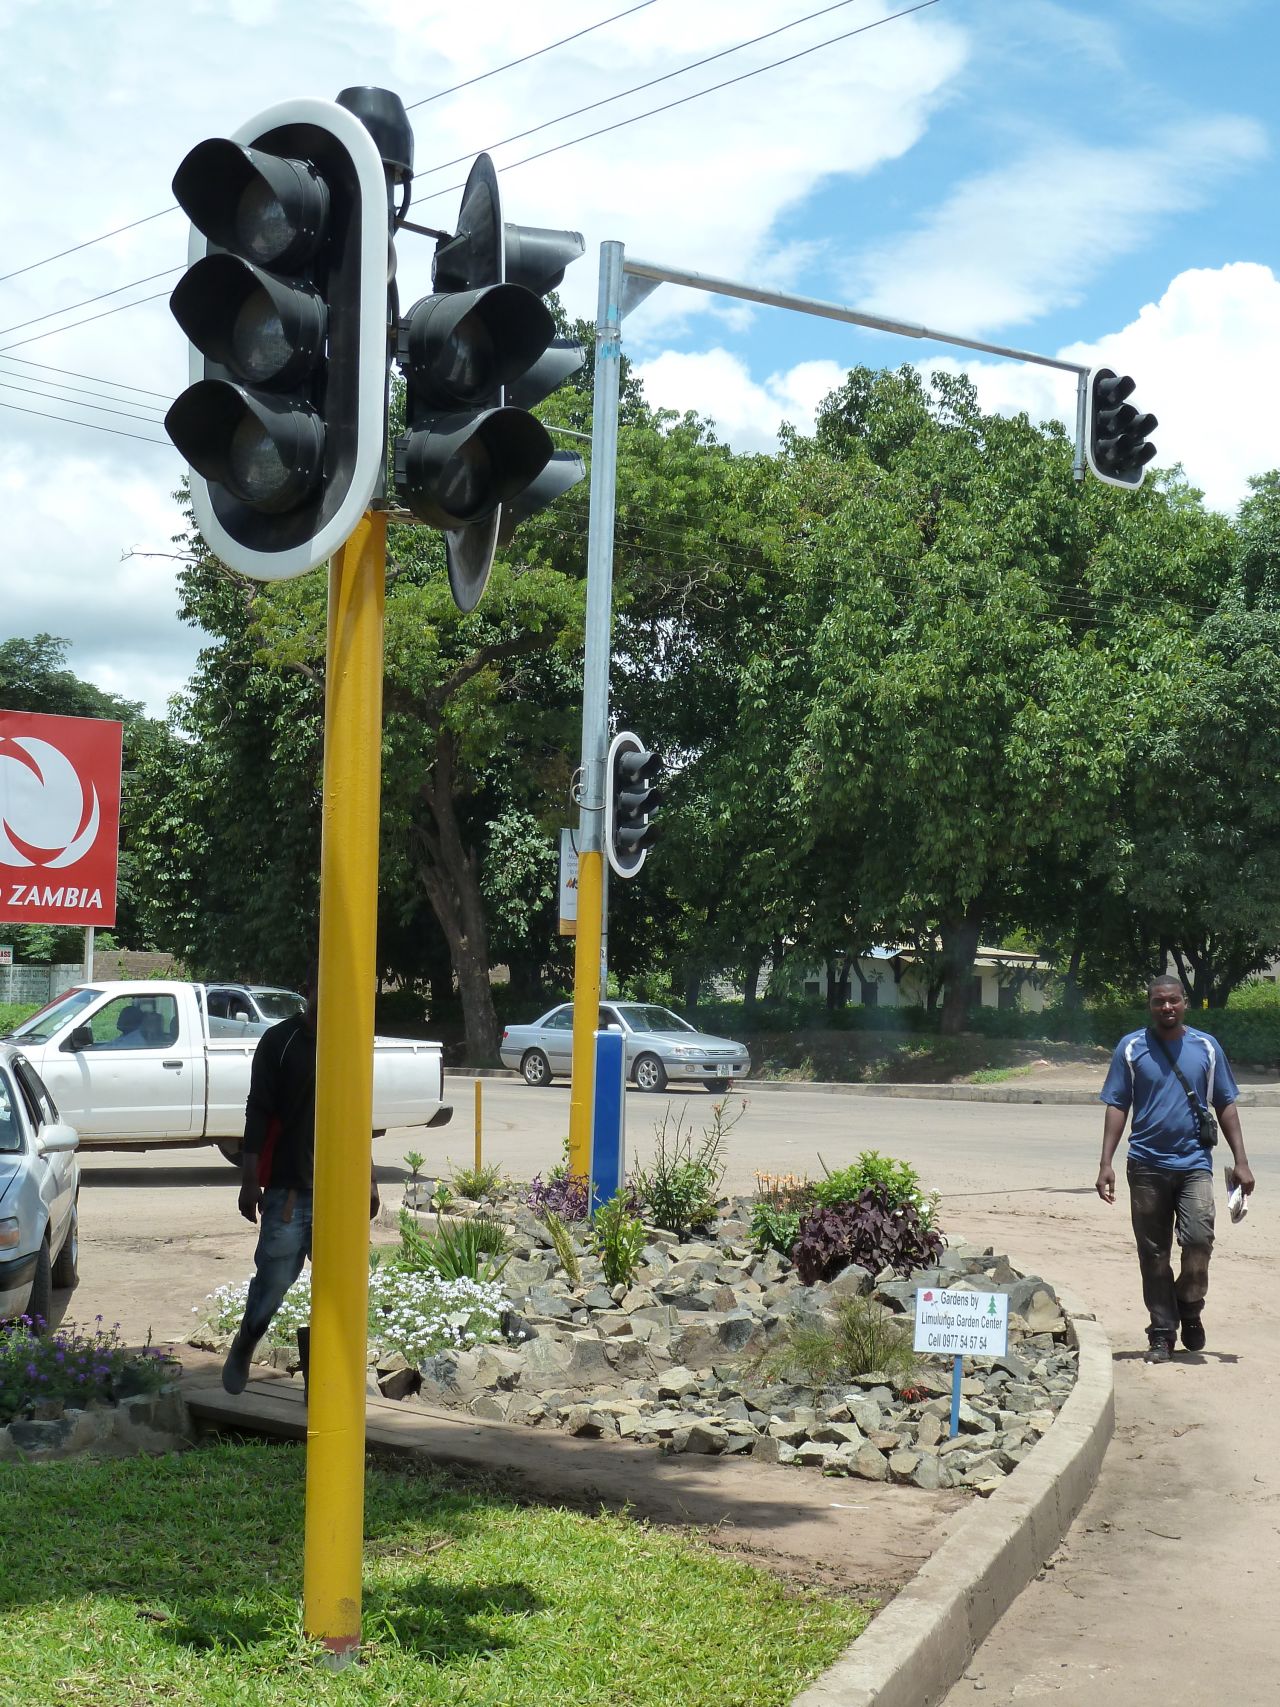 Livingstone's first ever traffic light was erected in 2011, and just like everywhere else in the world, people have already figured out sneaky ways to get around it.